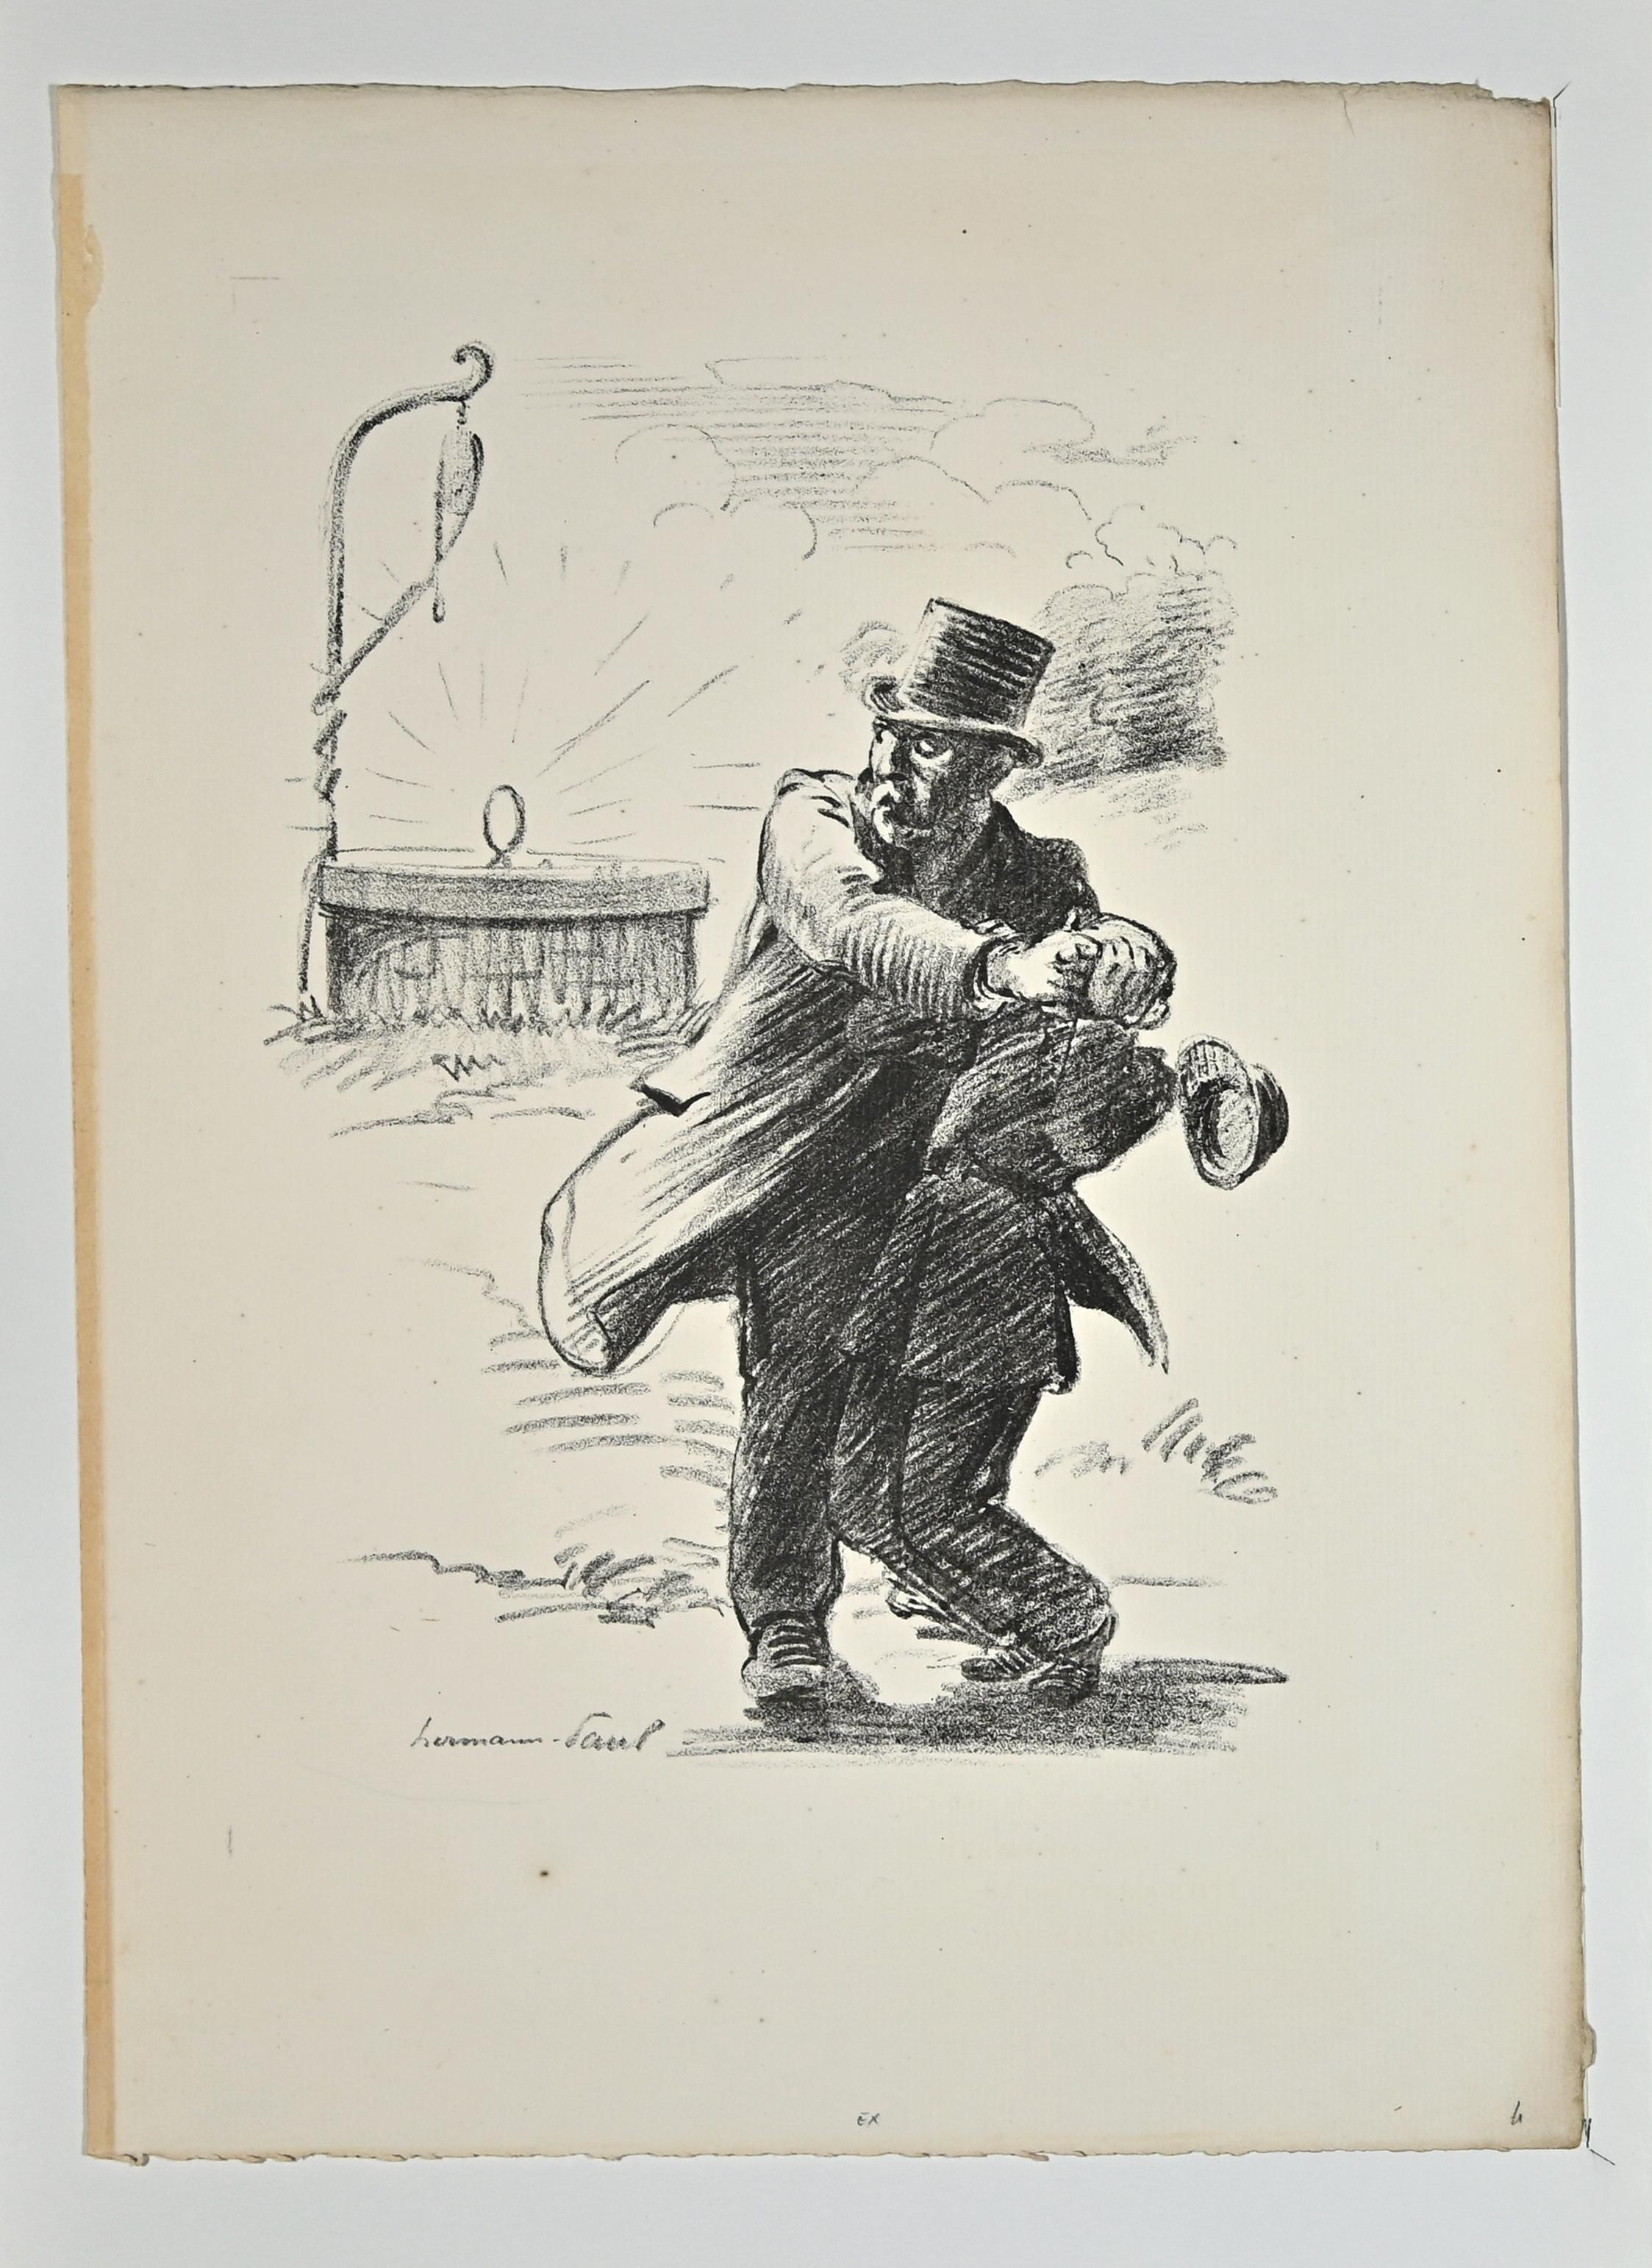 Hommage des artistes à Picquart is a Lithograph realized by Hermann Paul.

Hand signed on the lower left corner. Passpartout included cm 49x32.5

Good condition.

René Georges Hermann-Paul (27 December 1864 – 23 June 1940) was a French artist. He